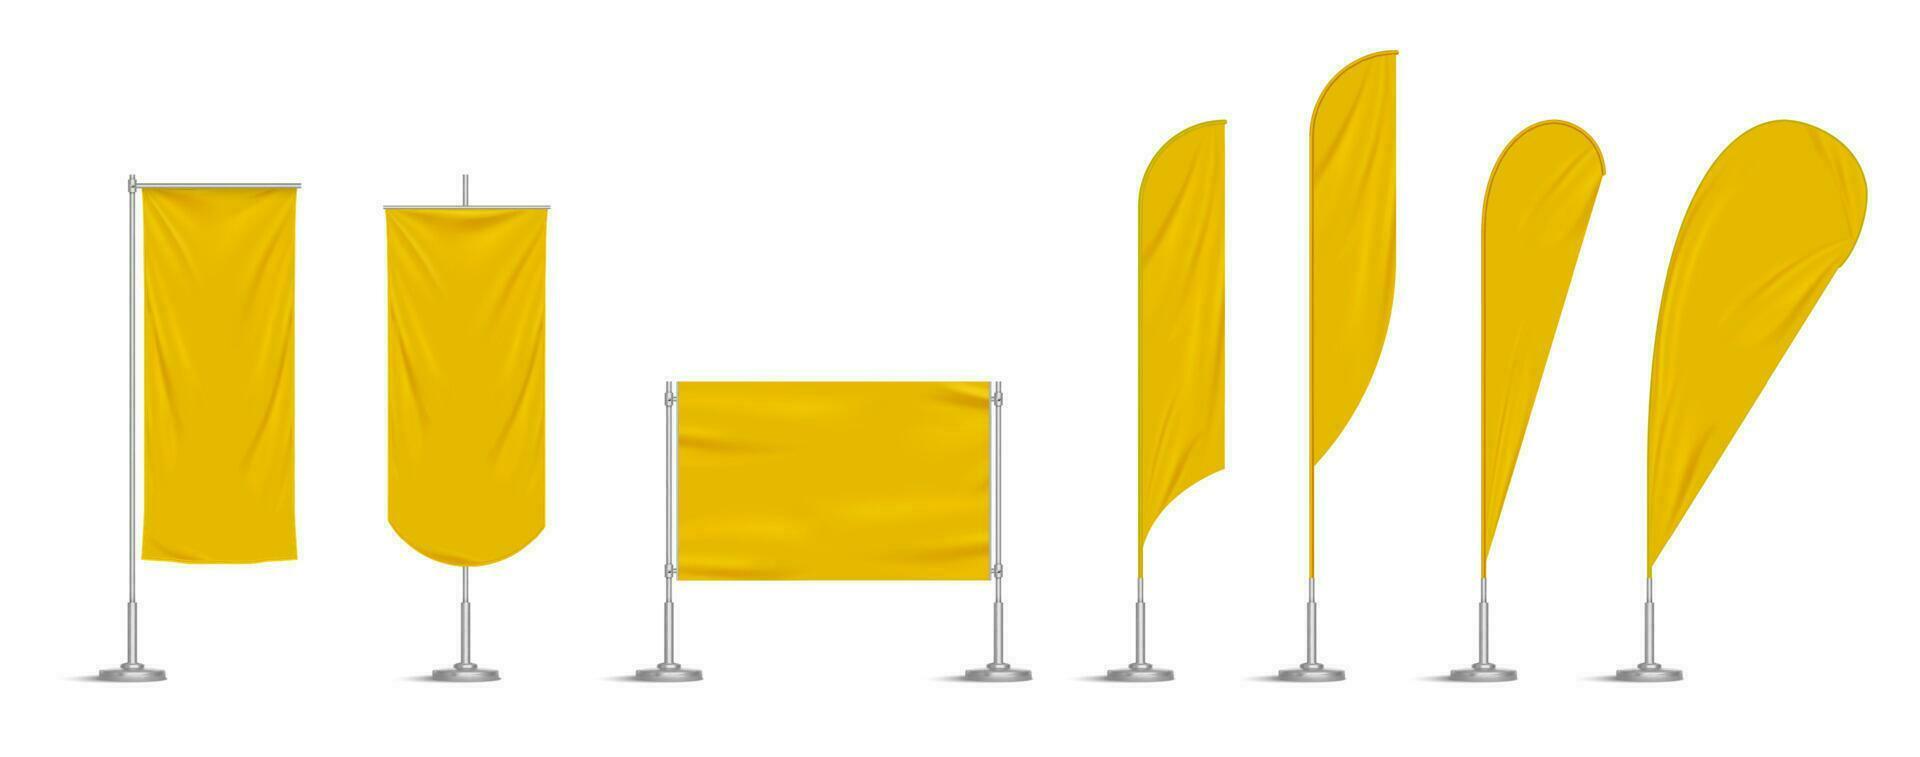 Yellow vinyl flags and set banners on pole vector